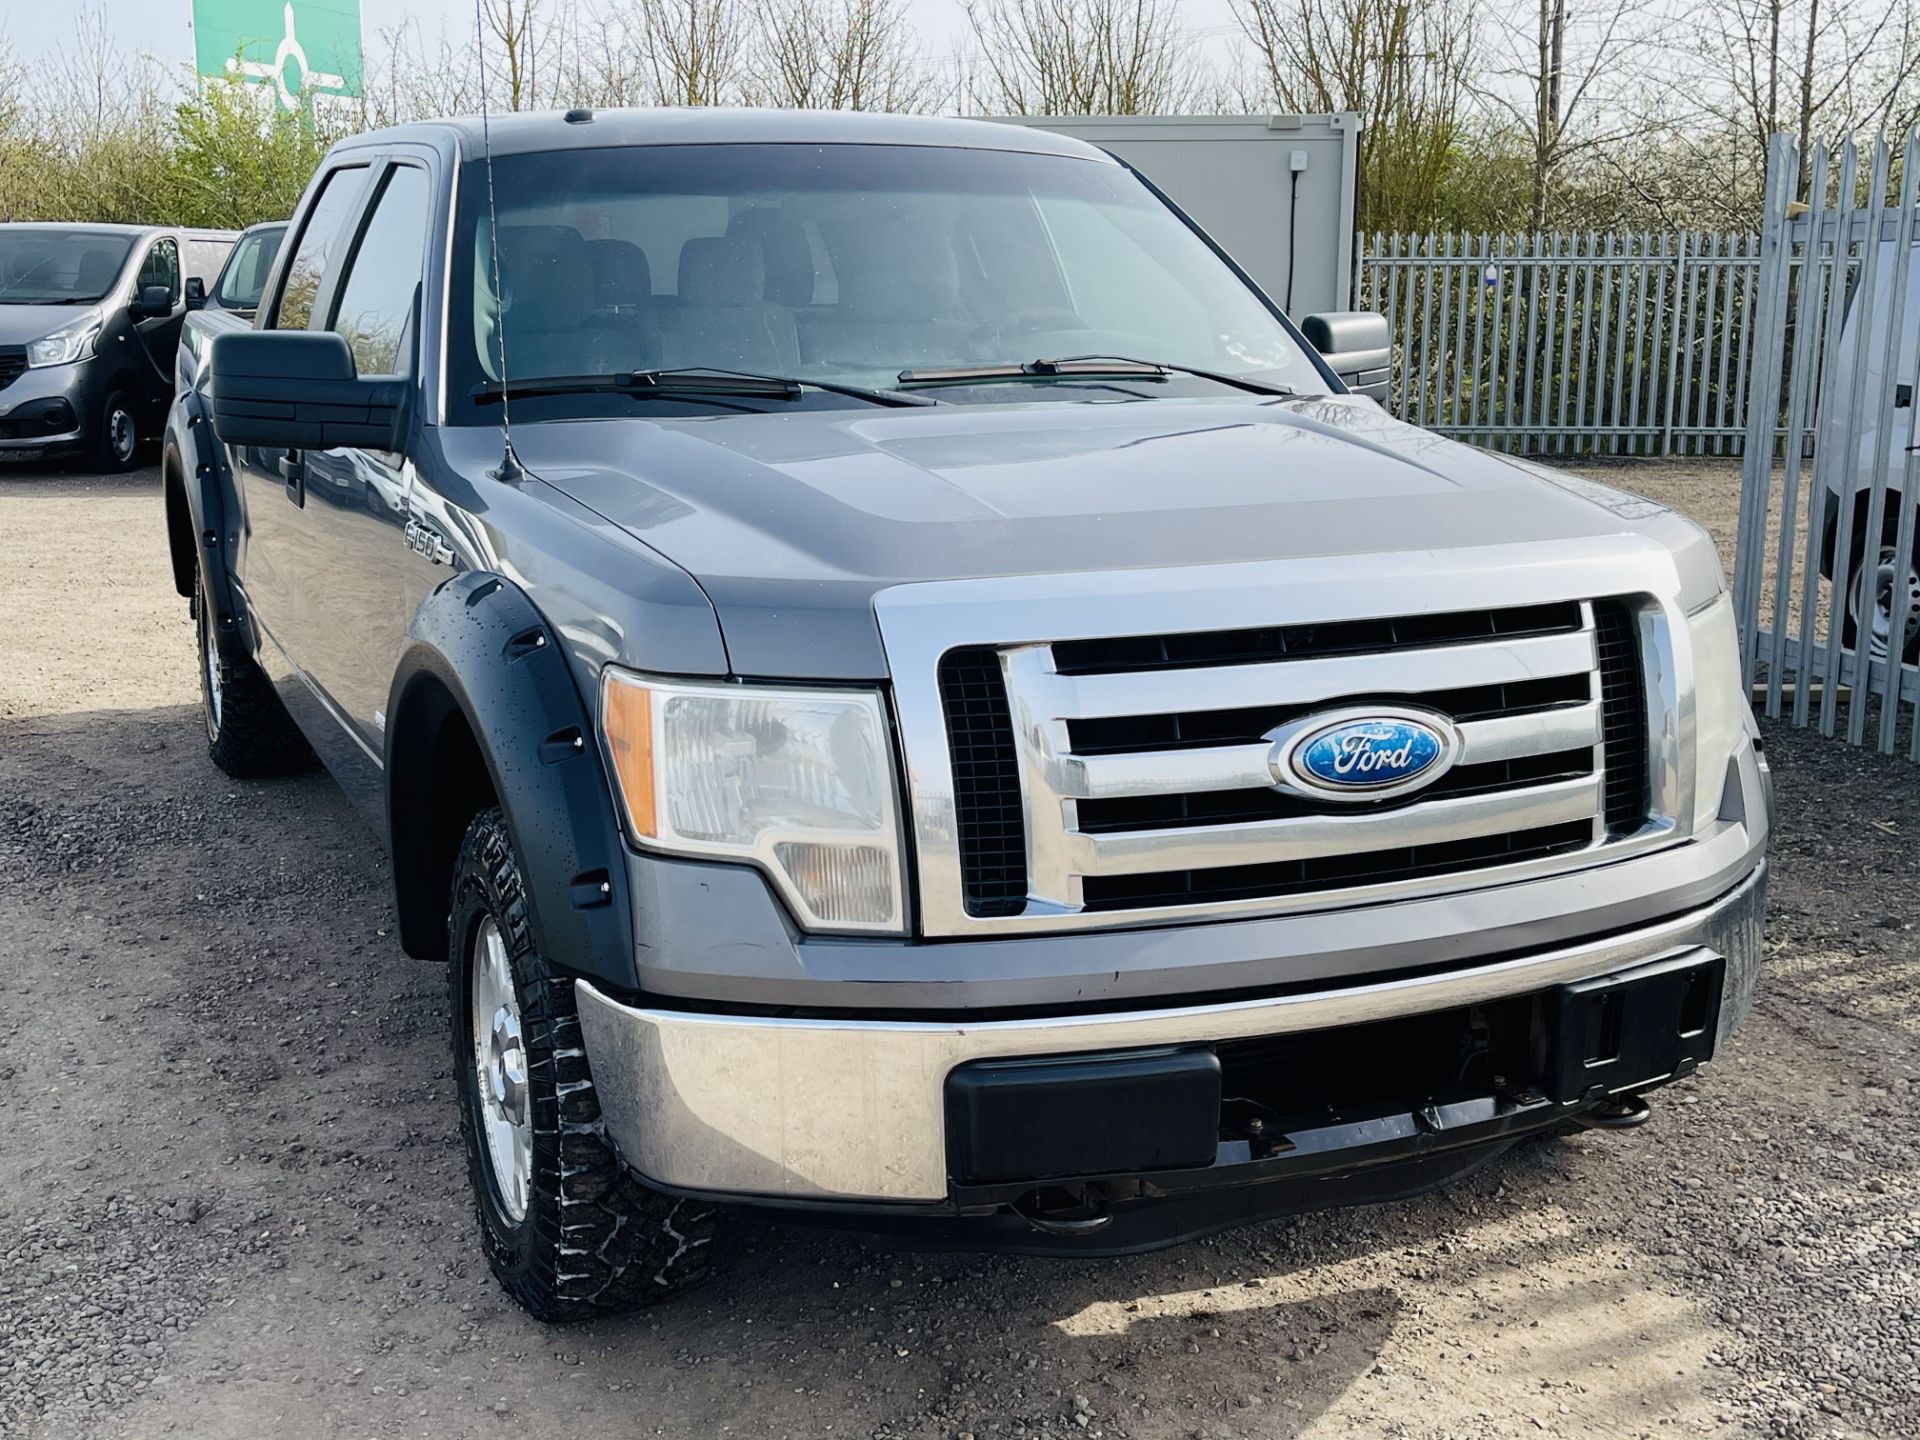 Ford F-150 XLT Edition 3.5L V6 Eco-boost Super-Crew 4x4 - '2012 Year' - Air Con - No Vat save 20% - Image 2 of 25